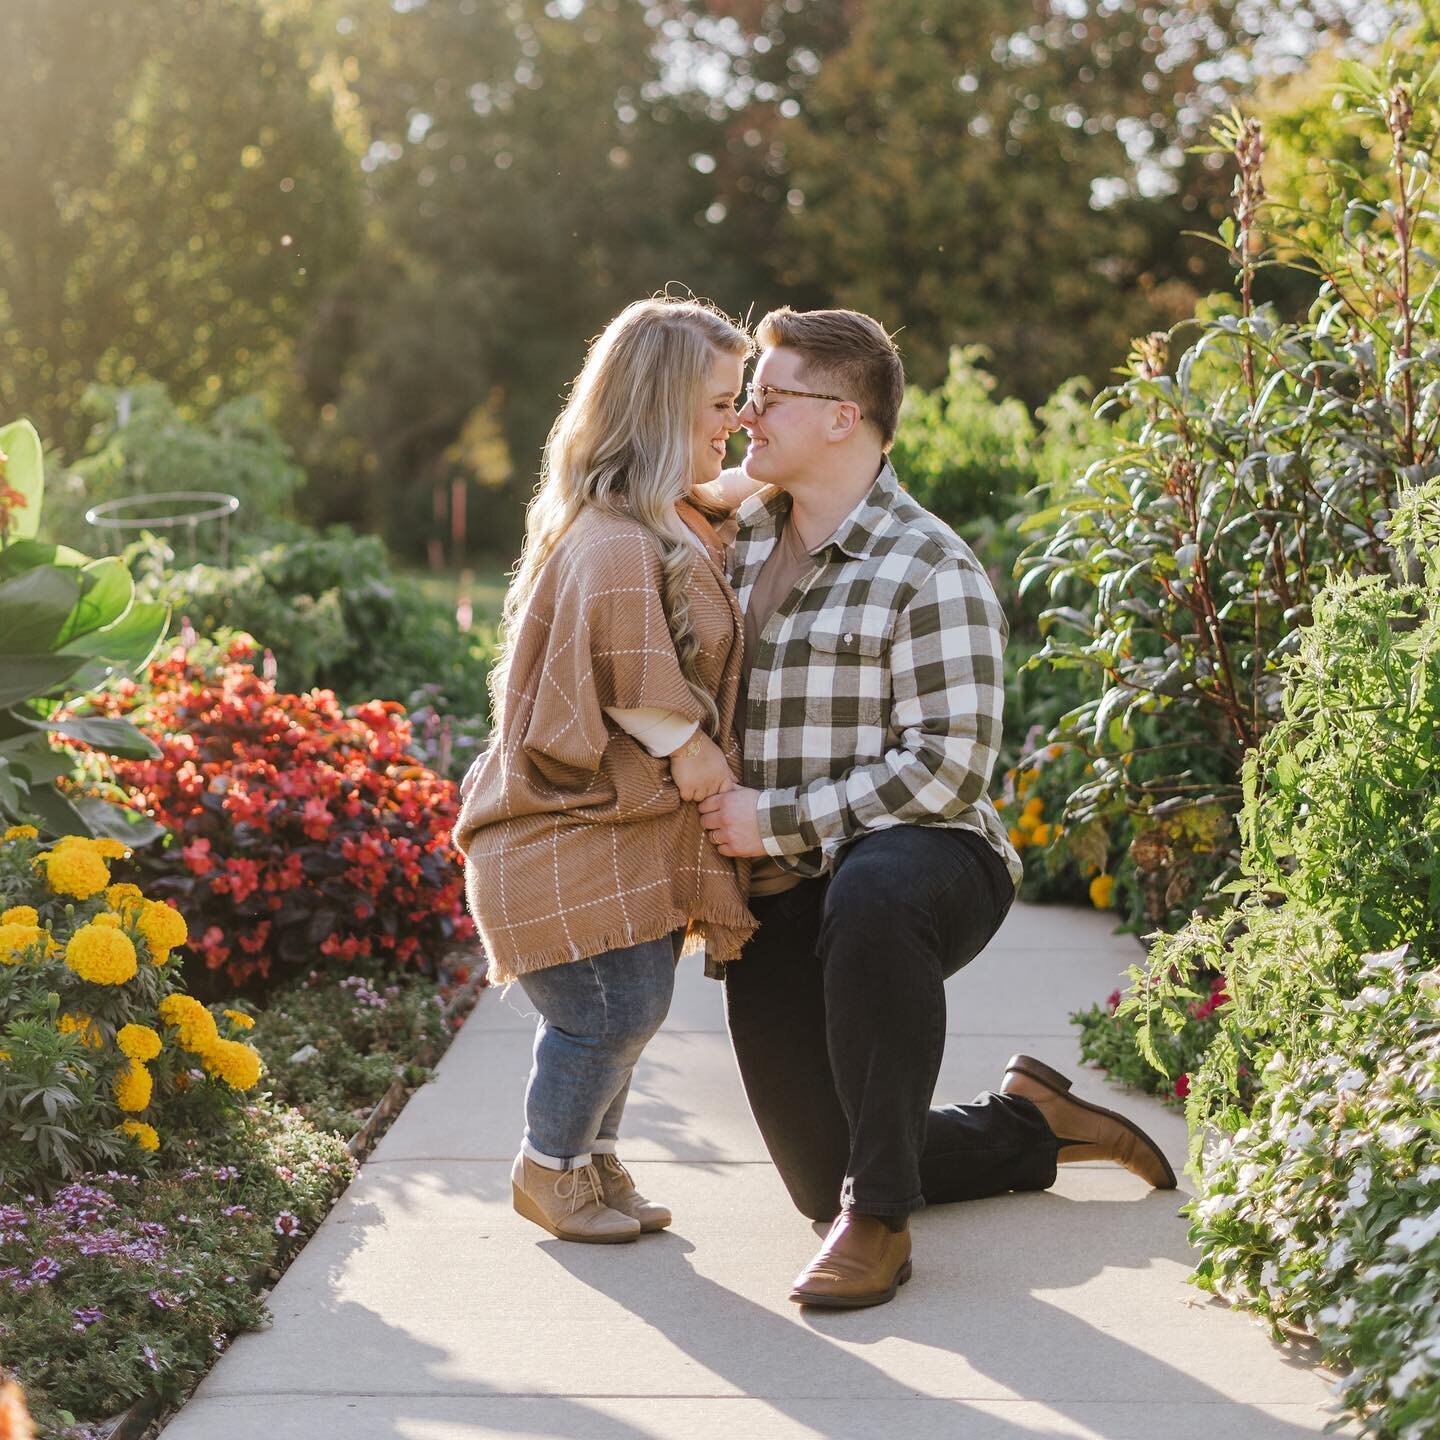 Who could dream of a more perfectly matched couple than Mariah &amp; Courtney? Like chai and fall - they just make sense in the best way!
.
These two showed me around some beautiful spots in Davenport and I just loved getting to hang with them for an